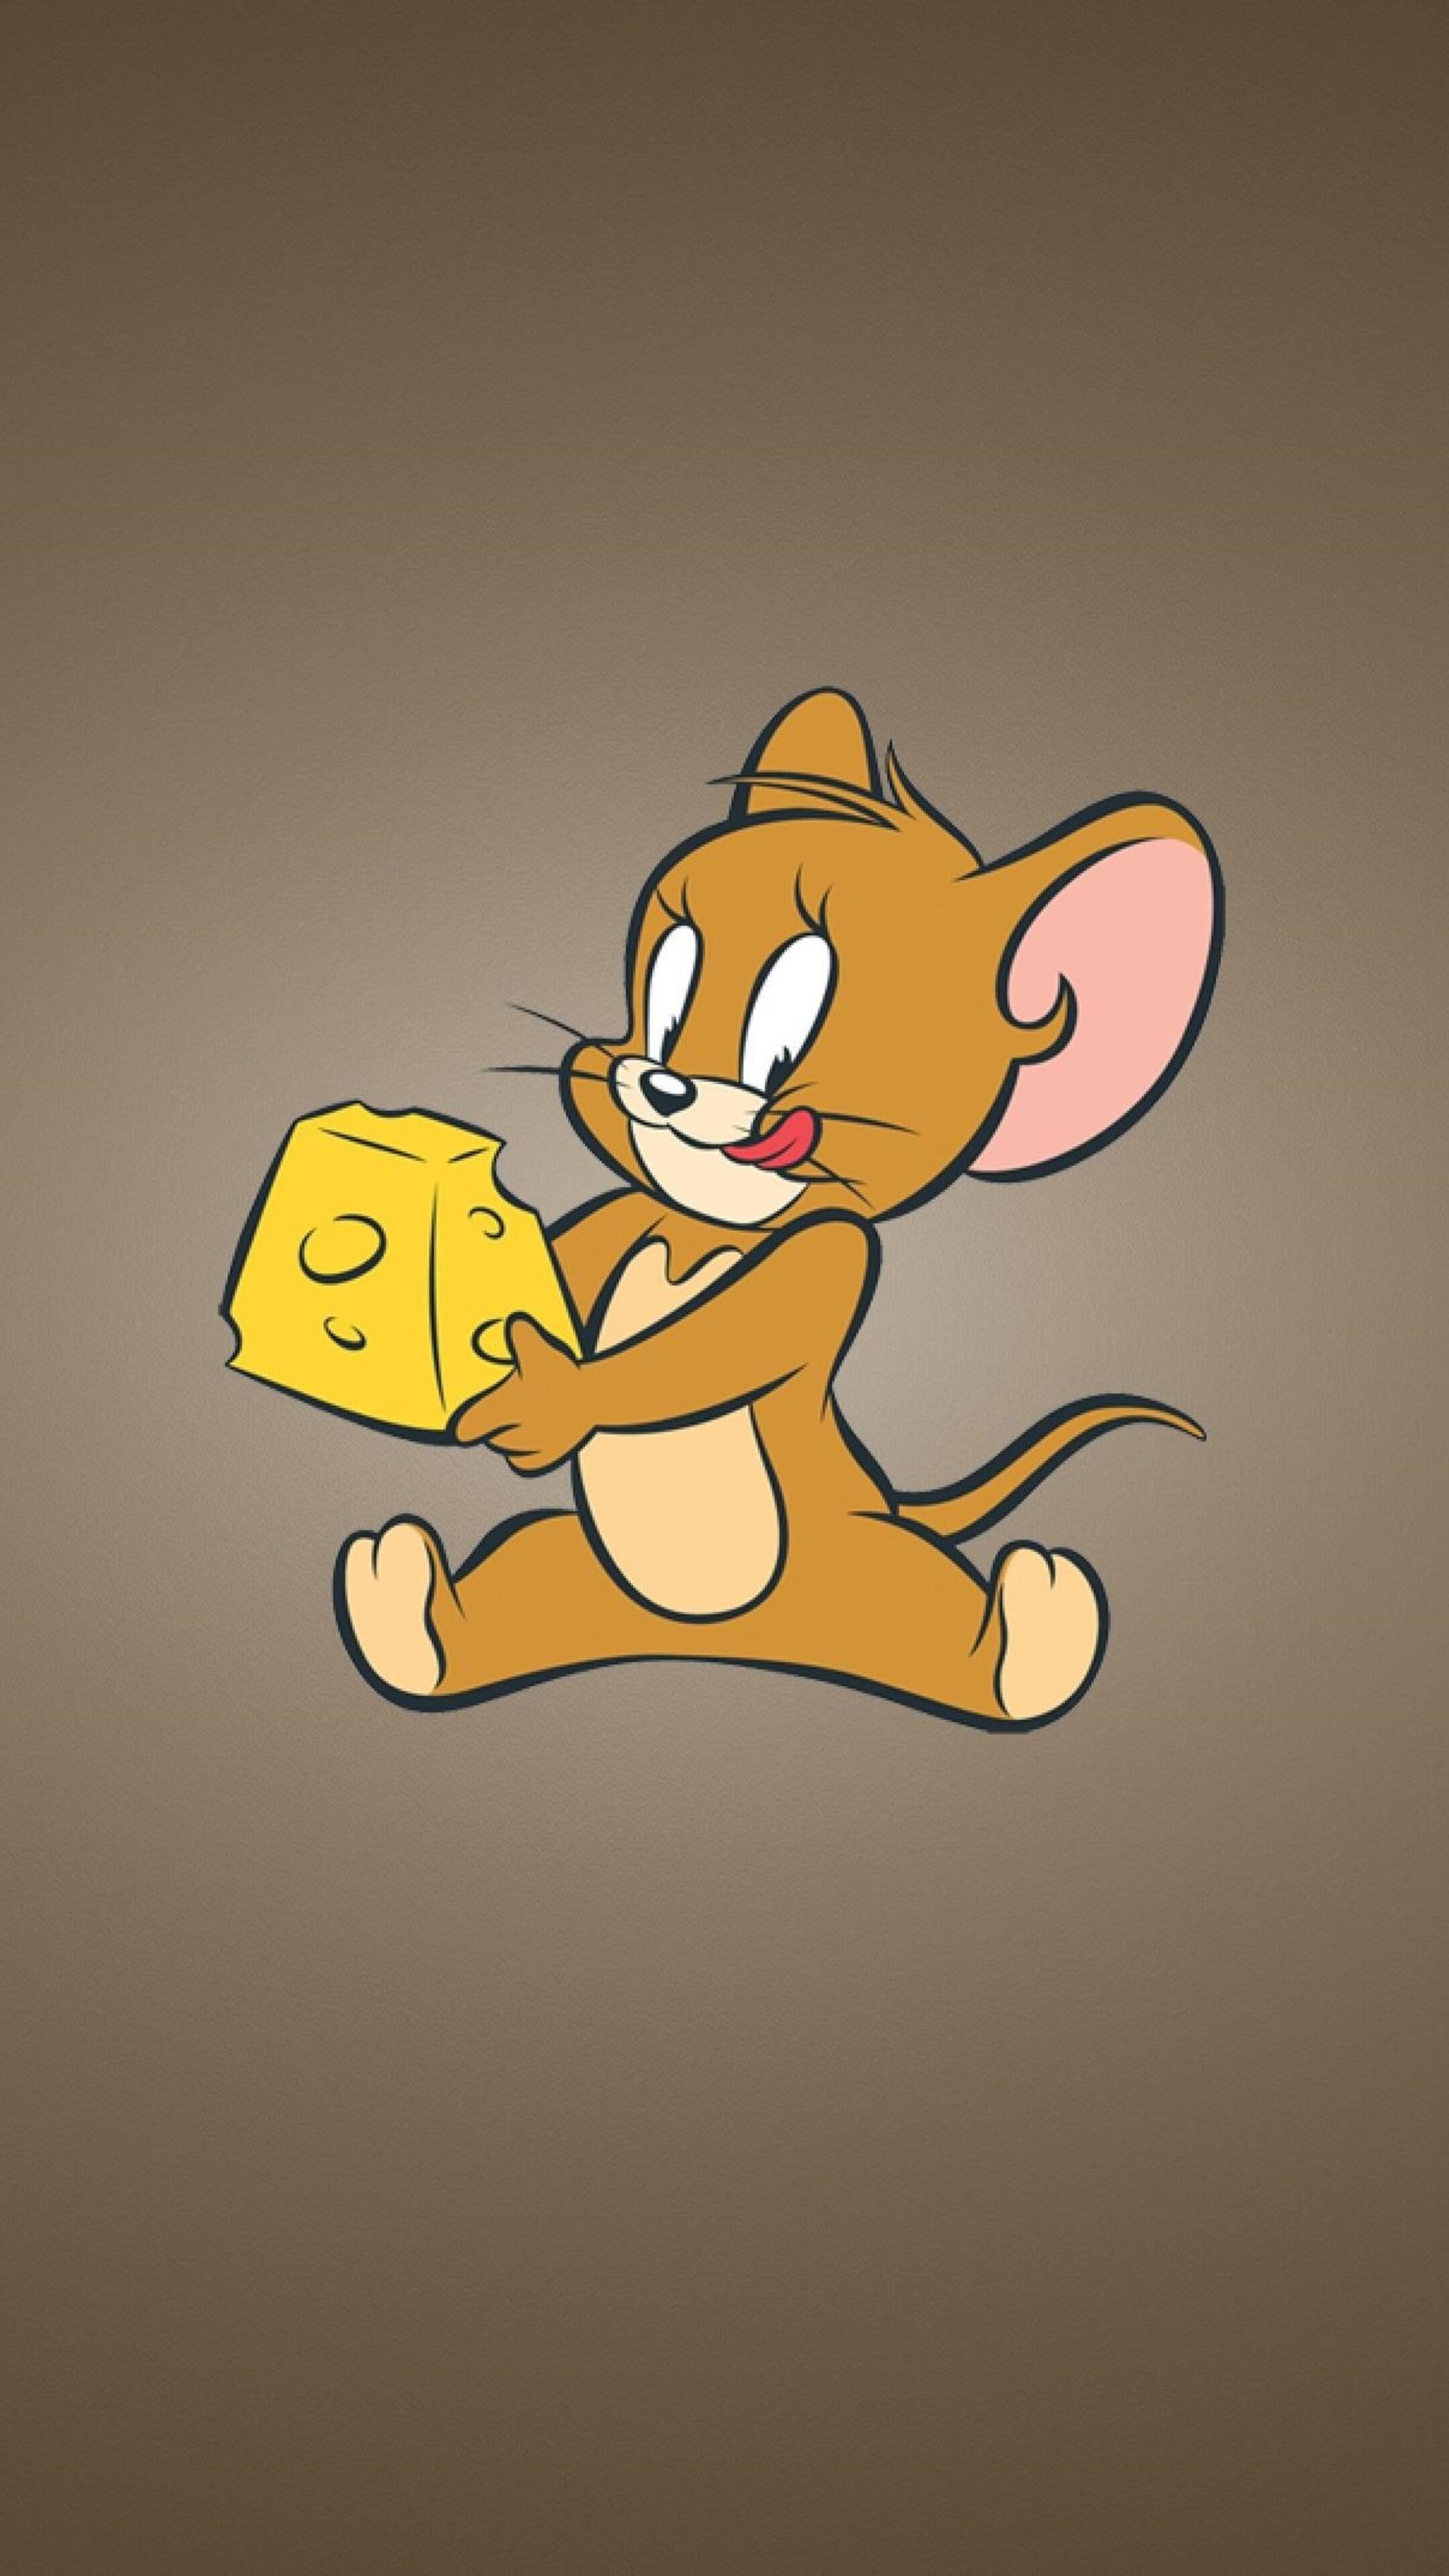 Tom and Jerry Sony Xperia wallpaper, Premium high definition, Stylish design, Mobile customization, 2160x3840 4K Phone